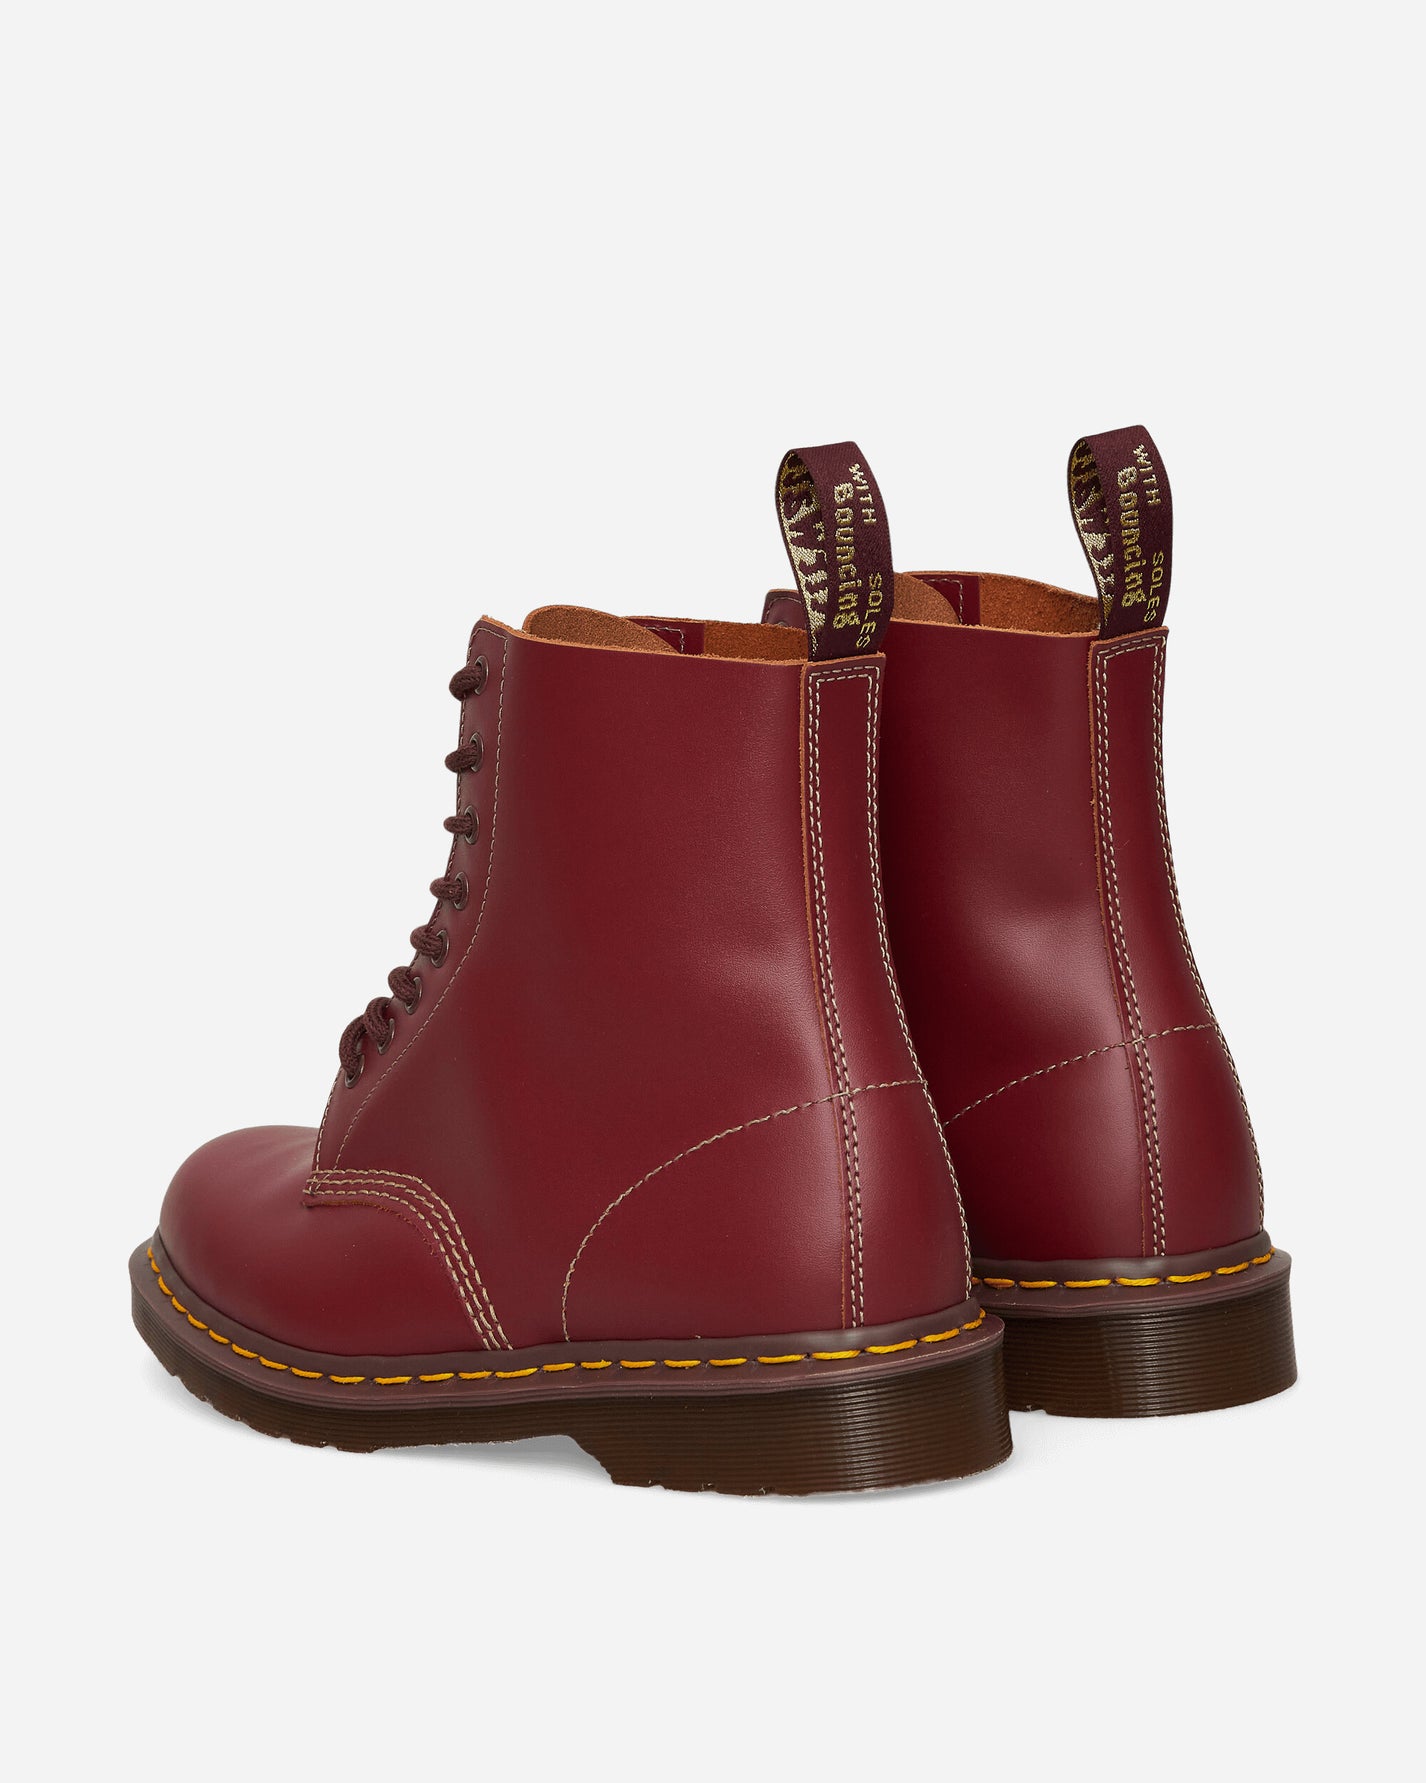 Dr. Martens Vintage 1460 Oxblood Boots Laced Up Boots 12308601